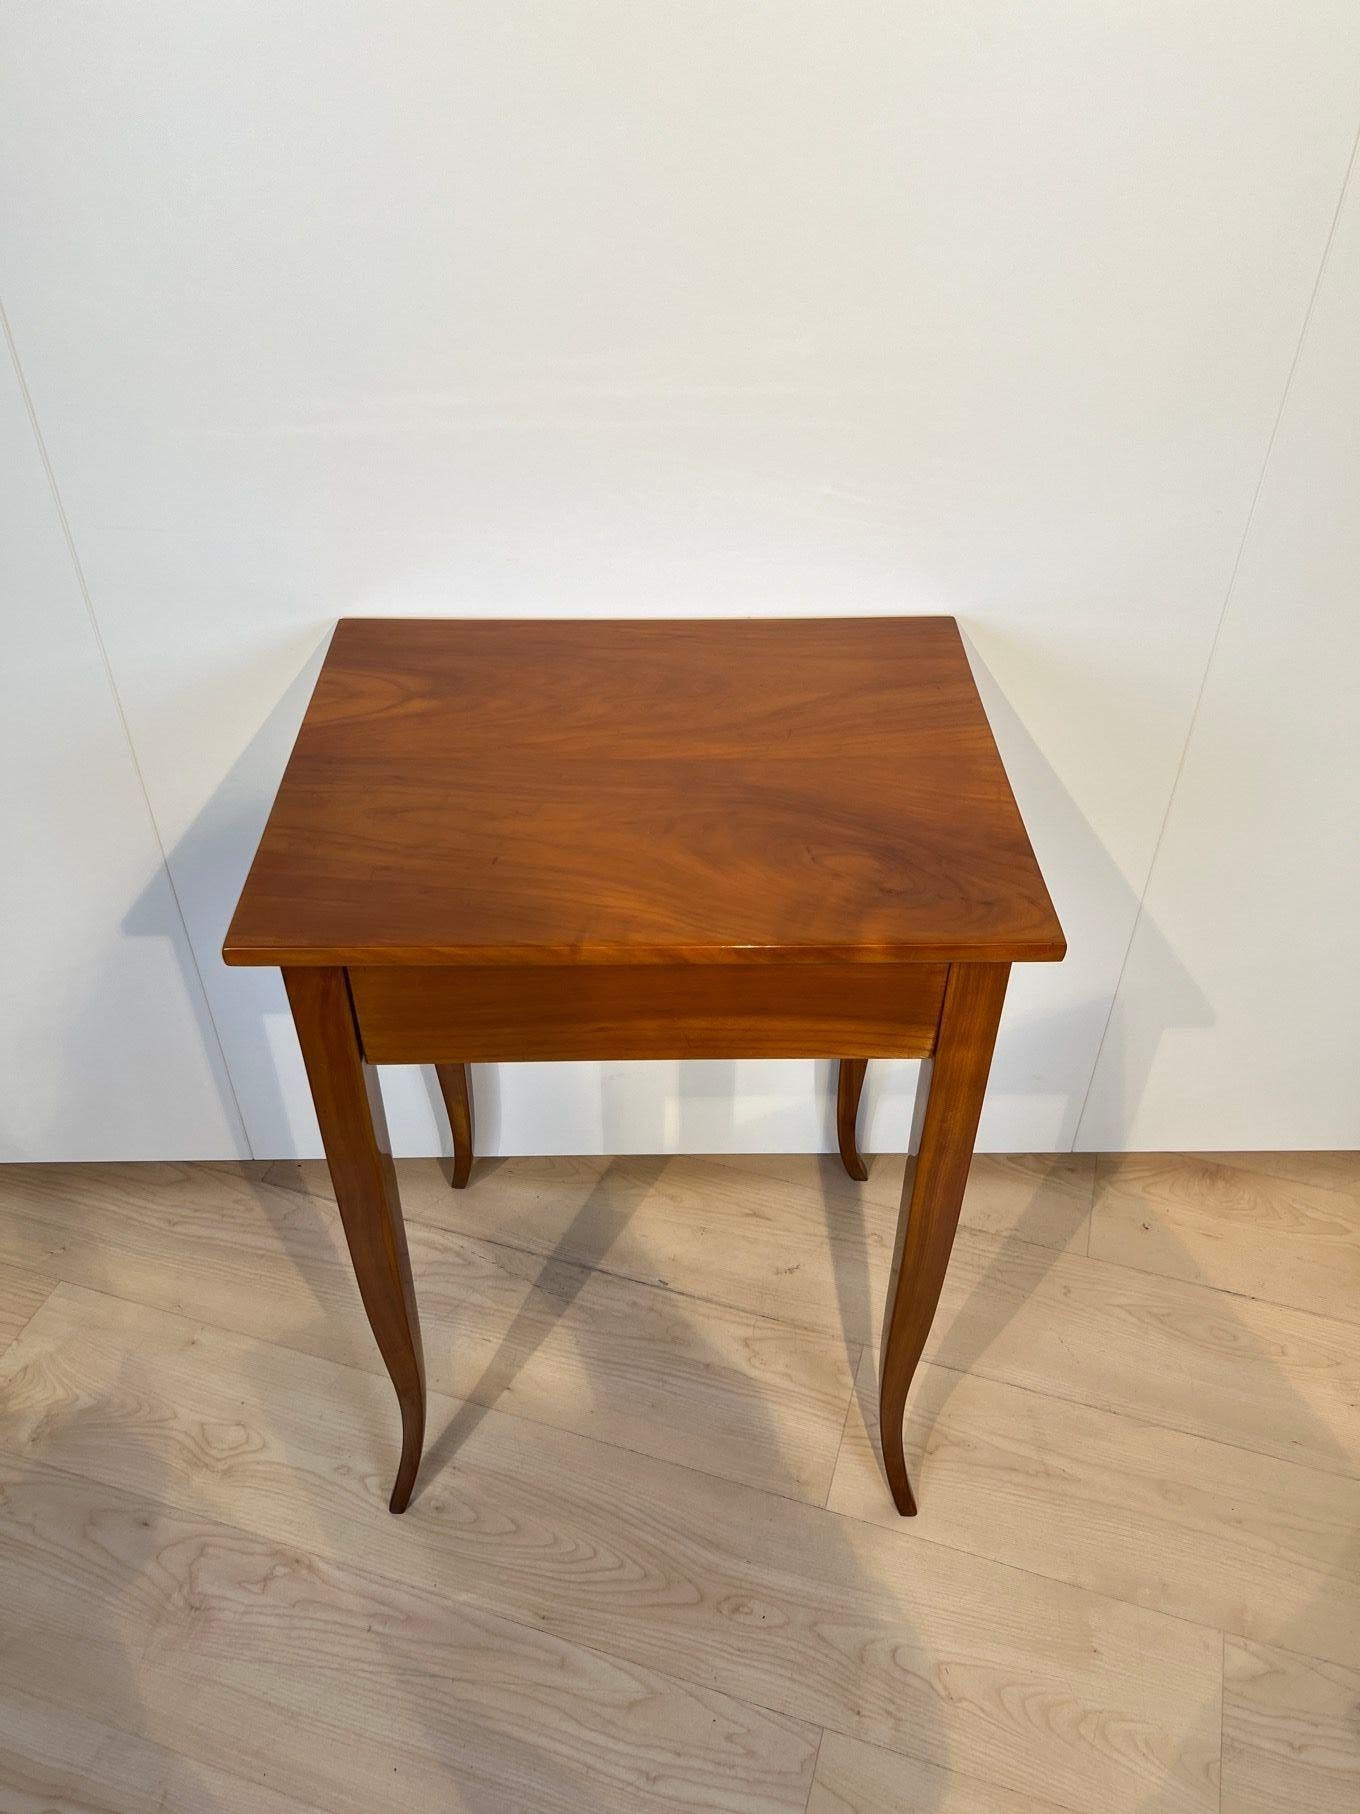 Polished Biedermeier Side Table with Drawer, Cherry Wood, South Germany circa 1825 For Sale